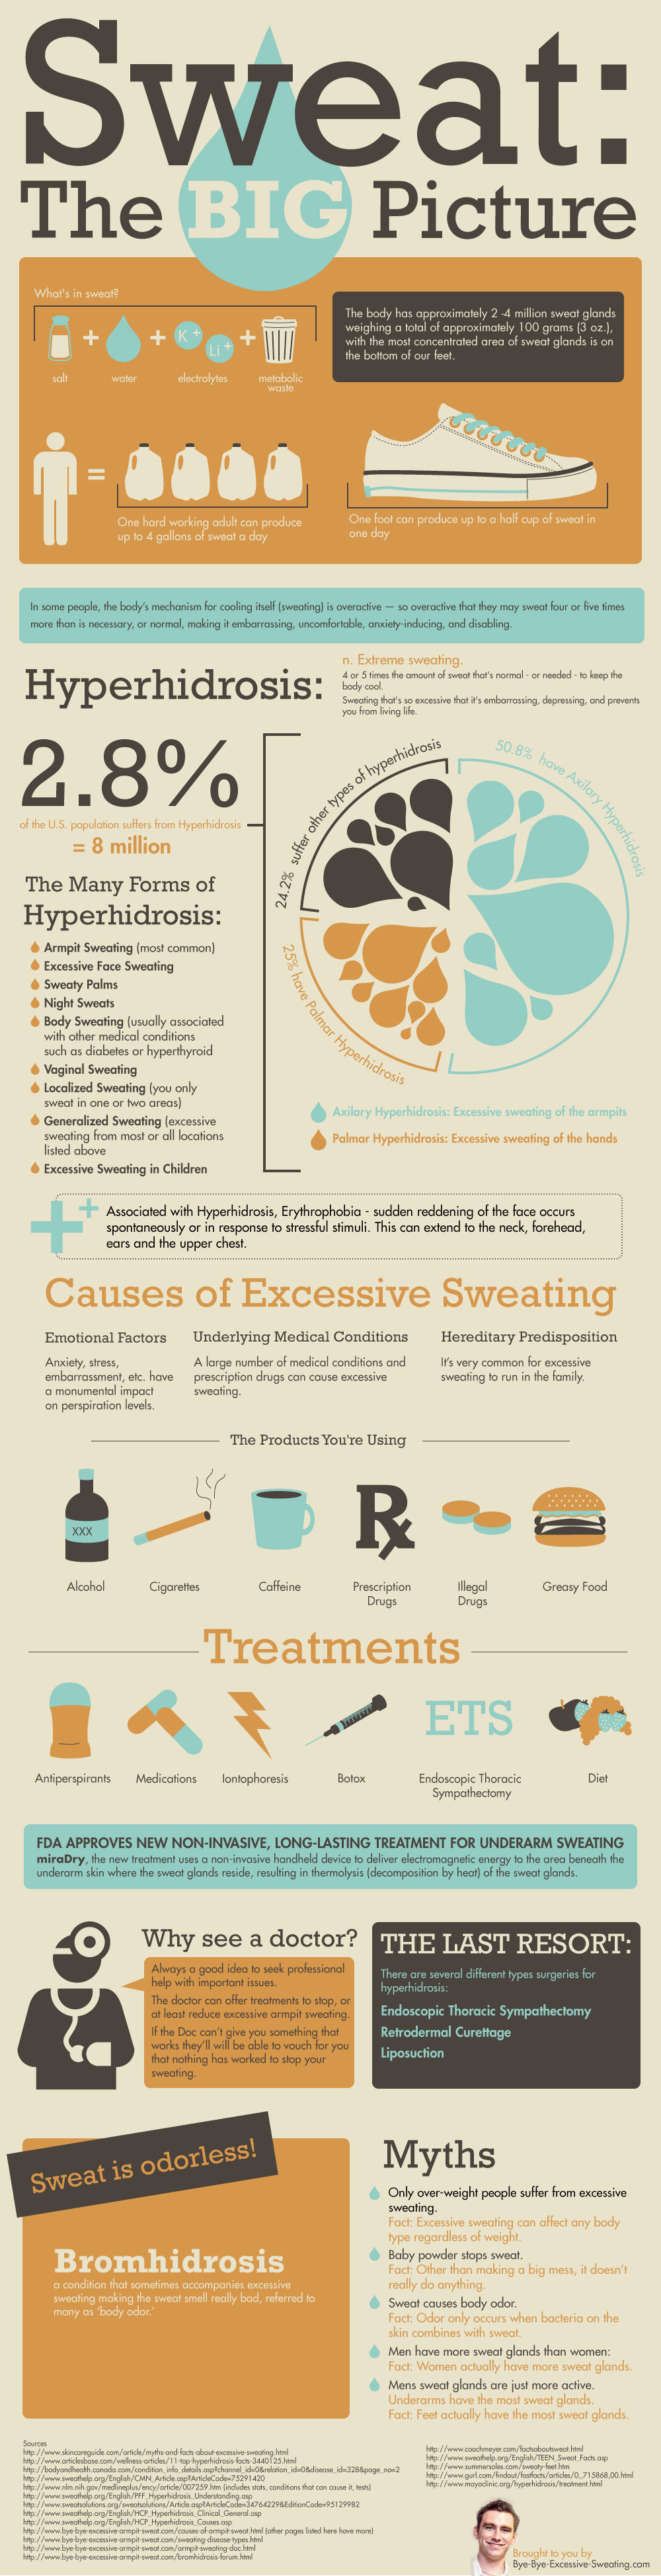 Effects and Causes of Sweating